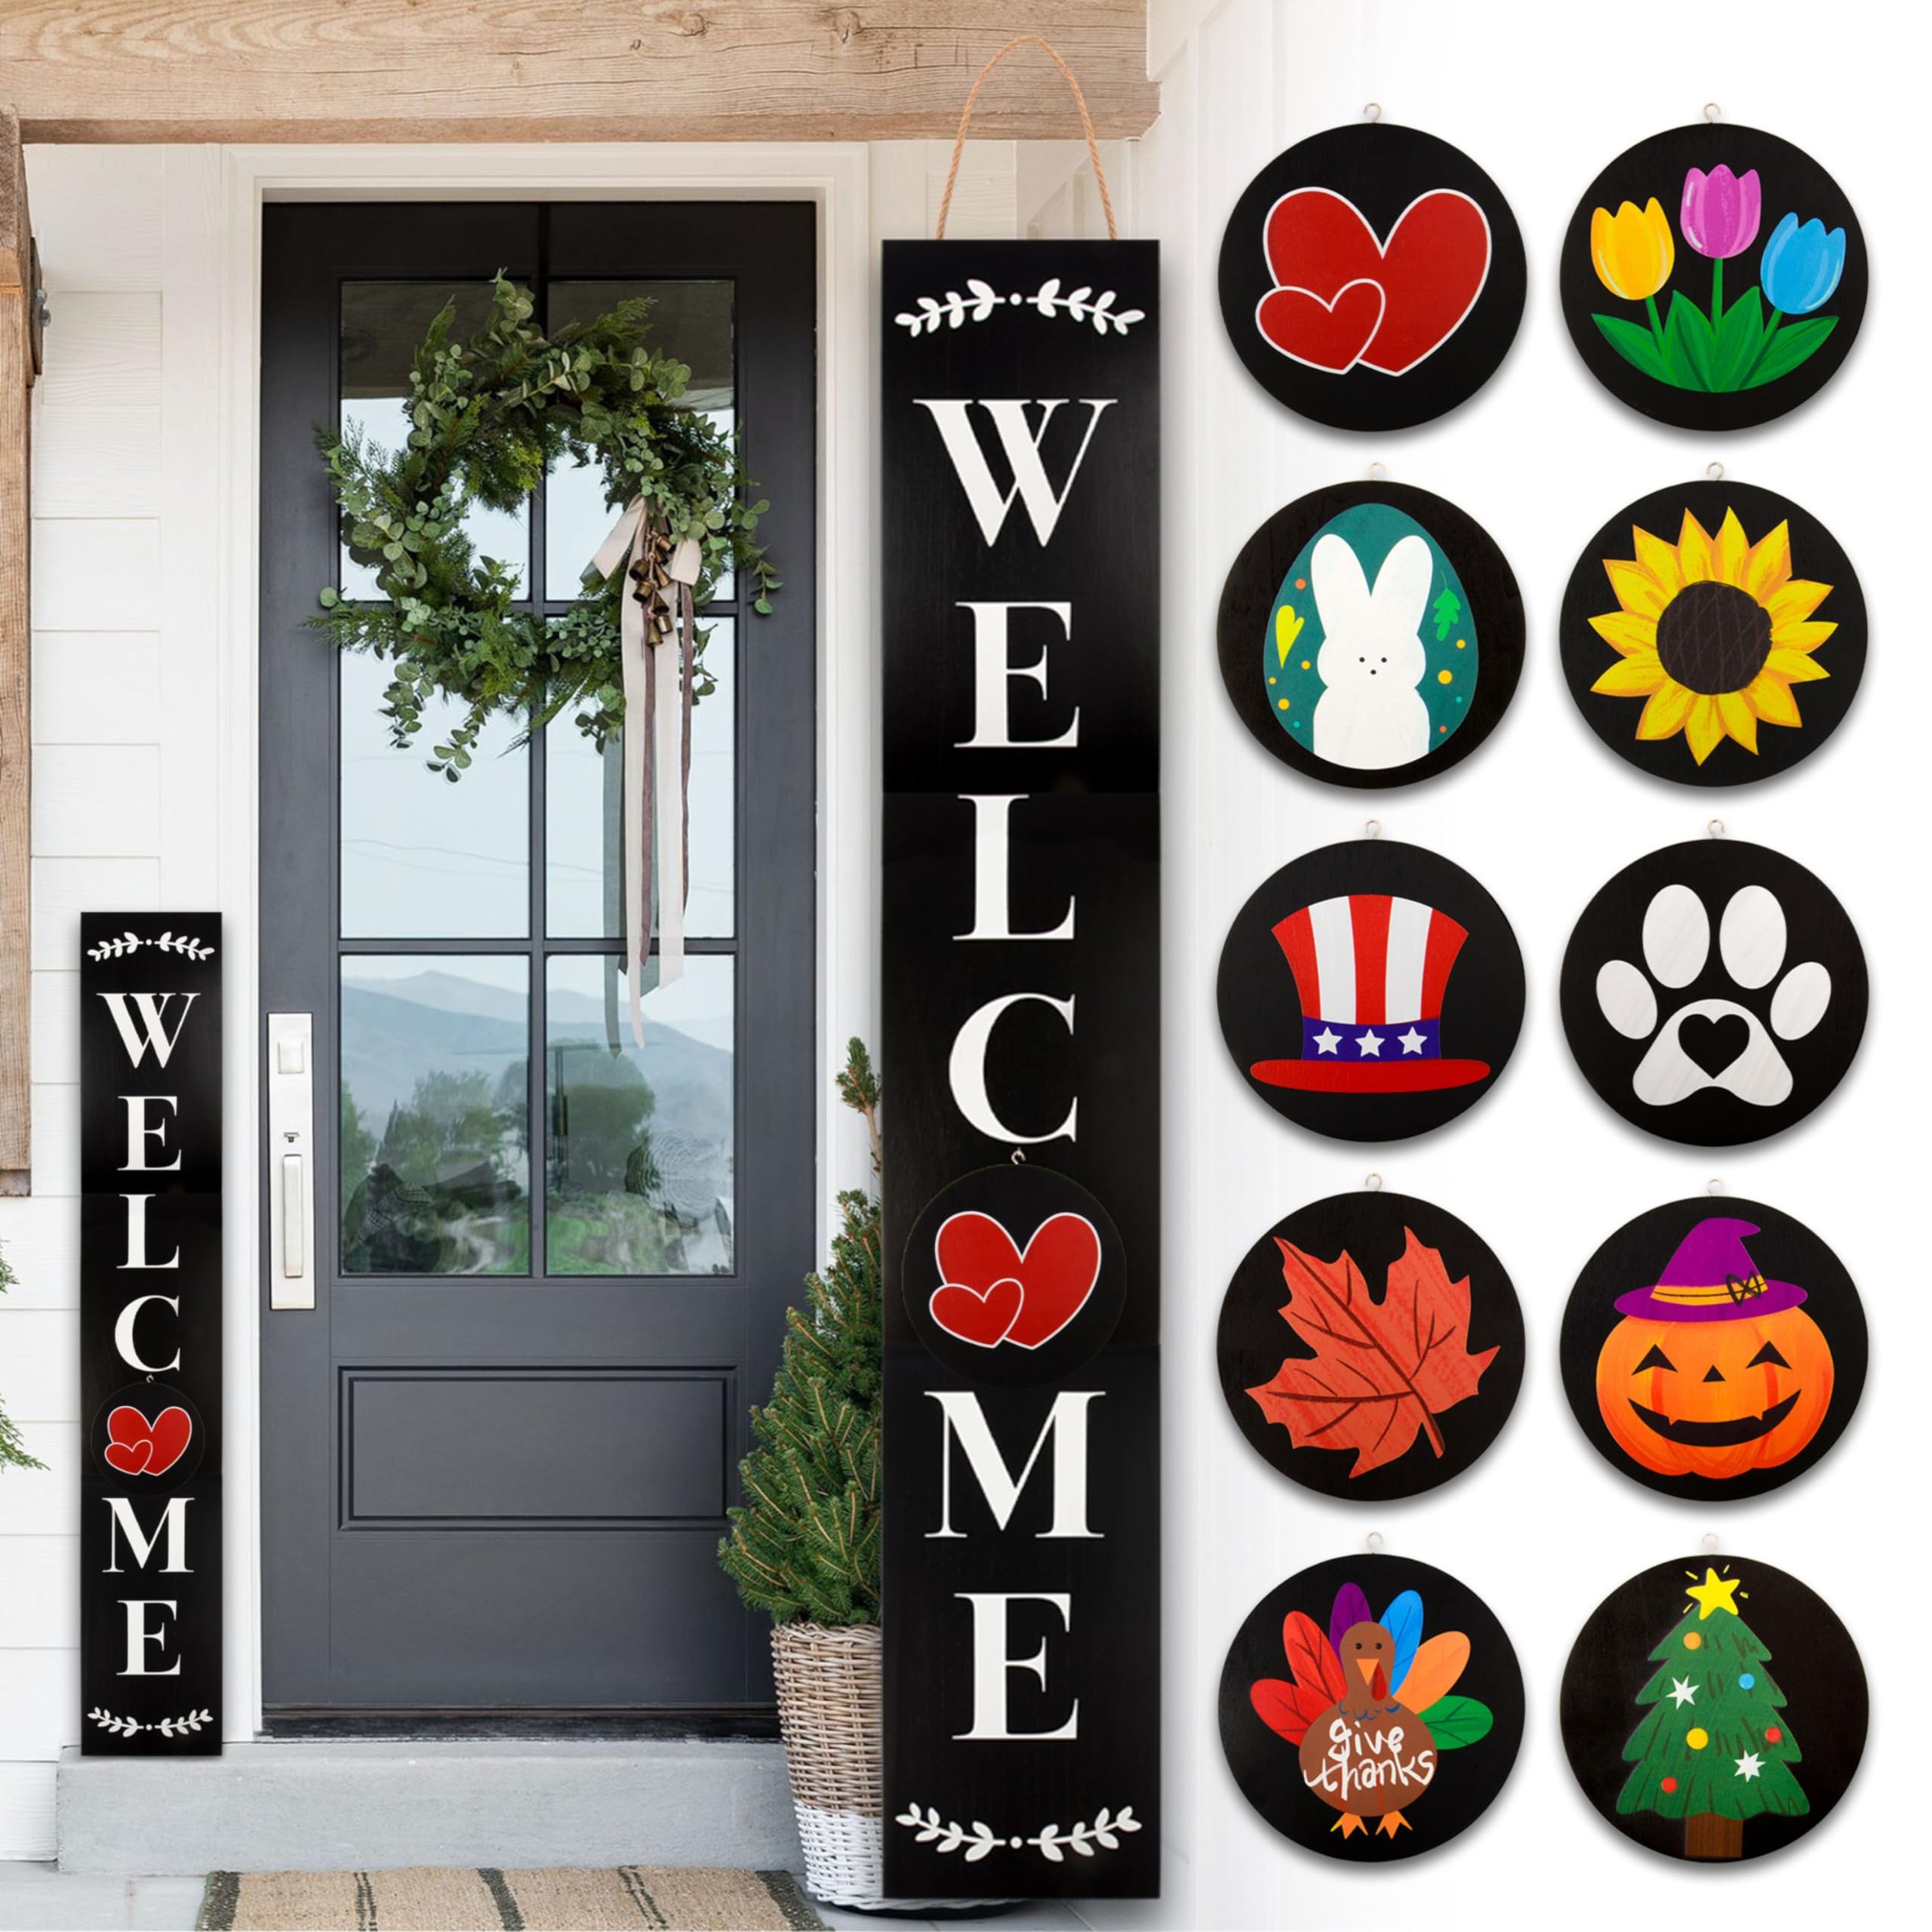 Monjita Welcome Sign for Front Porch Standing, Interchangeable Wooden Sign with 5 Designed Double-Sided Icons for Front Door, All Seasonal Farmhouse Rustic Modern Porch Decor for Fall Harvest